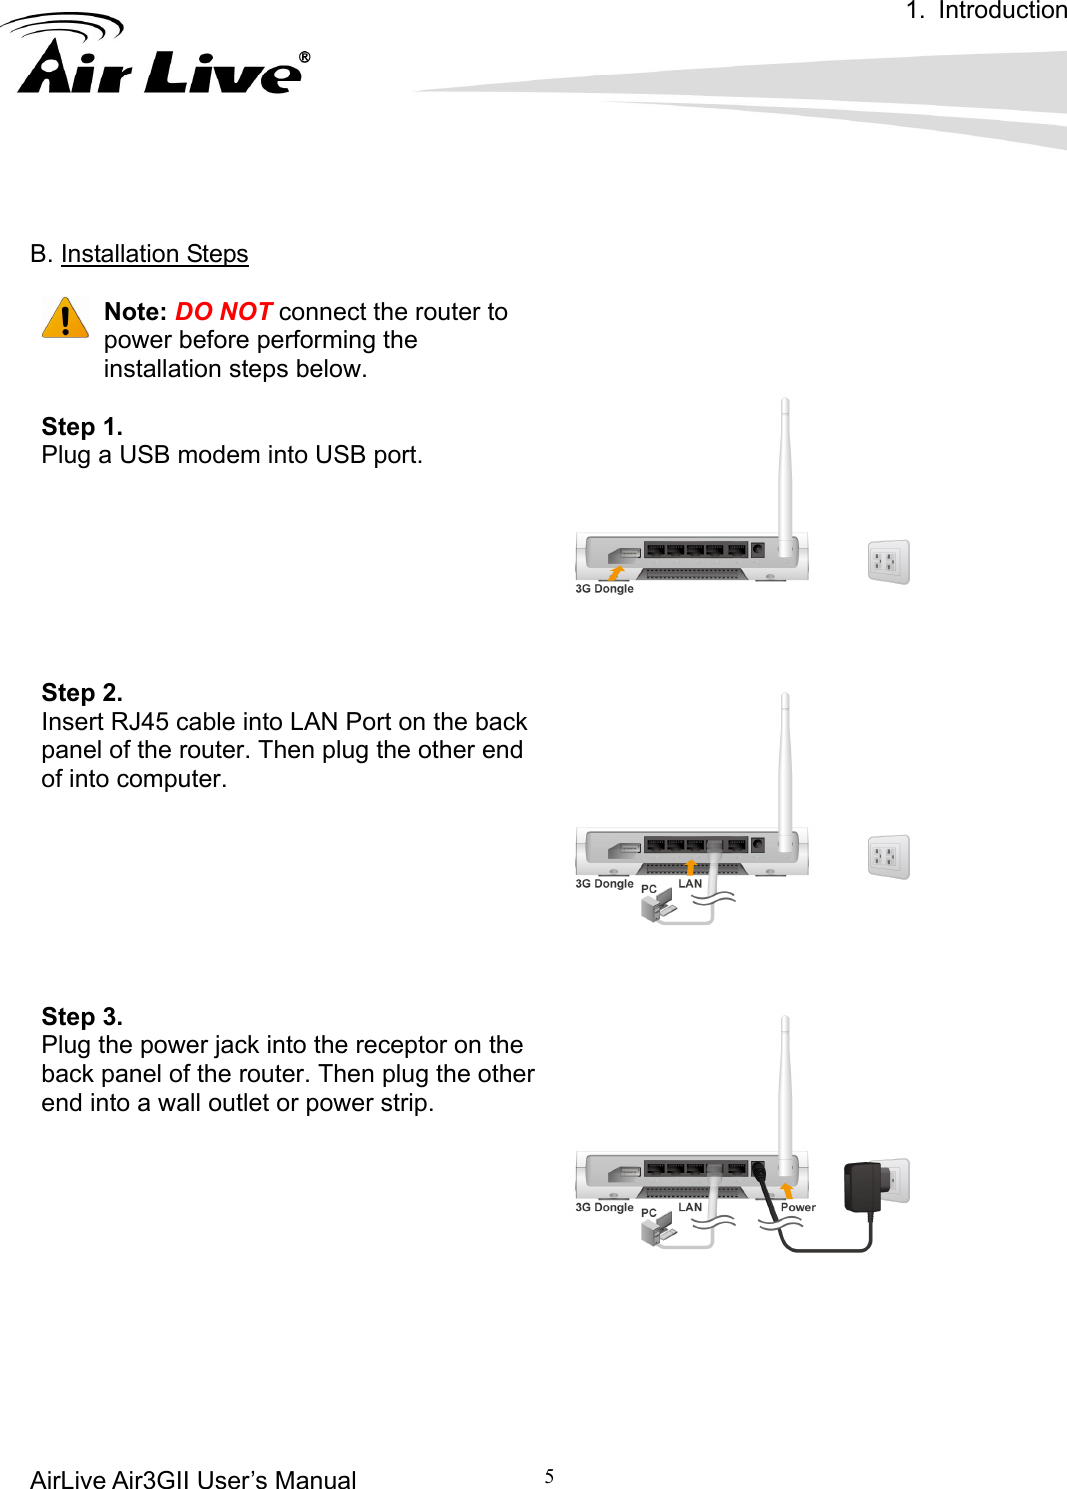 1. Introduction AirLive Air3GII User’s Manual         5          B. Installation Steps    Note: DO NOT connect the router to power before performing the installation steps below.  Step 1.   Plug a USB modem into USB port.       Step 2. Insert RJ45 cable into LAN Port on the back panel of the router. Then plug the other end of into computer.     Step 3. Plug the power jack into the receptor on the back panel of the router. Then plug the other end into a wall outlet or power strip.        